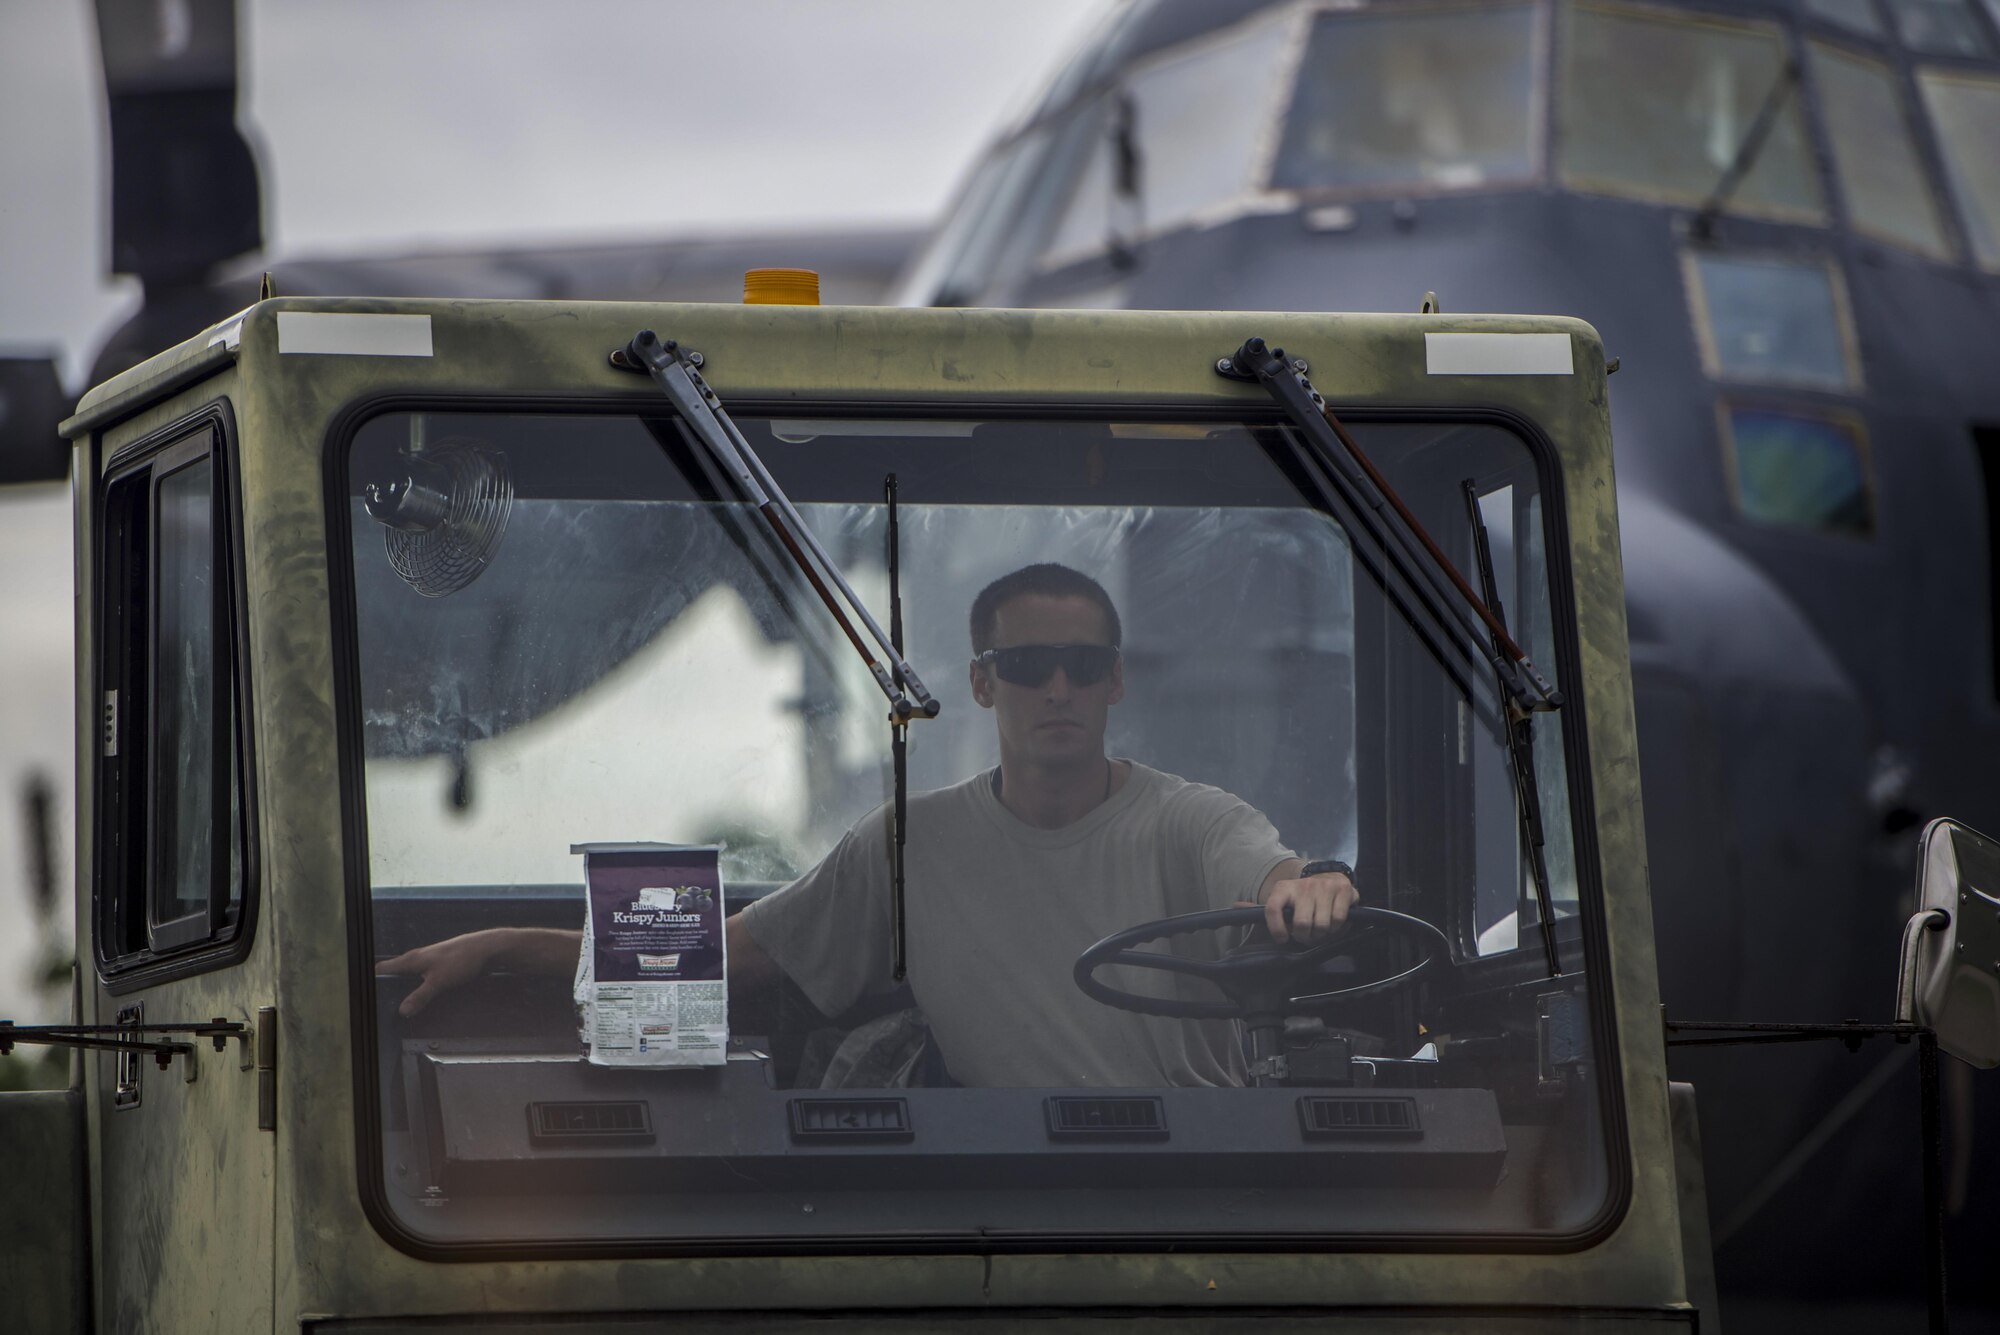 Staff Sgt. Jeffrey Minard, 901st Special Operations Aircraft Maintenance Squadron dedicated crew chief, tows an MC-130P Combat Shadow from the flightline to the Air Park on Hurlburt Field, Fla., Aug. 15, 2015. More than 40 personnel with eight base organizations were on site during the tow process. The MC-130P Combat Shadow known as “Team Shadow” will be displayed at the South end of the Air Park. (U.S. Air Force photo by Senior Airman Christopher Callaway/released)